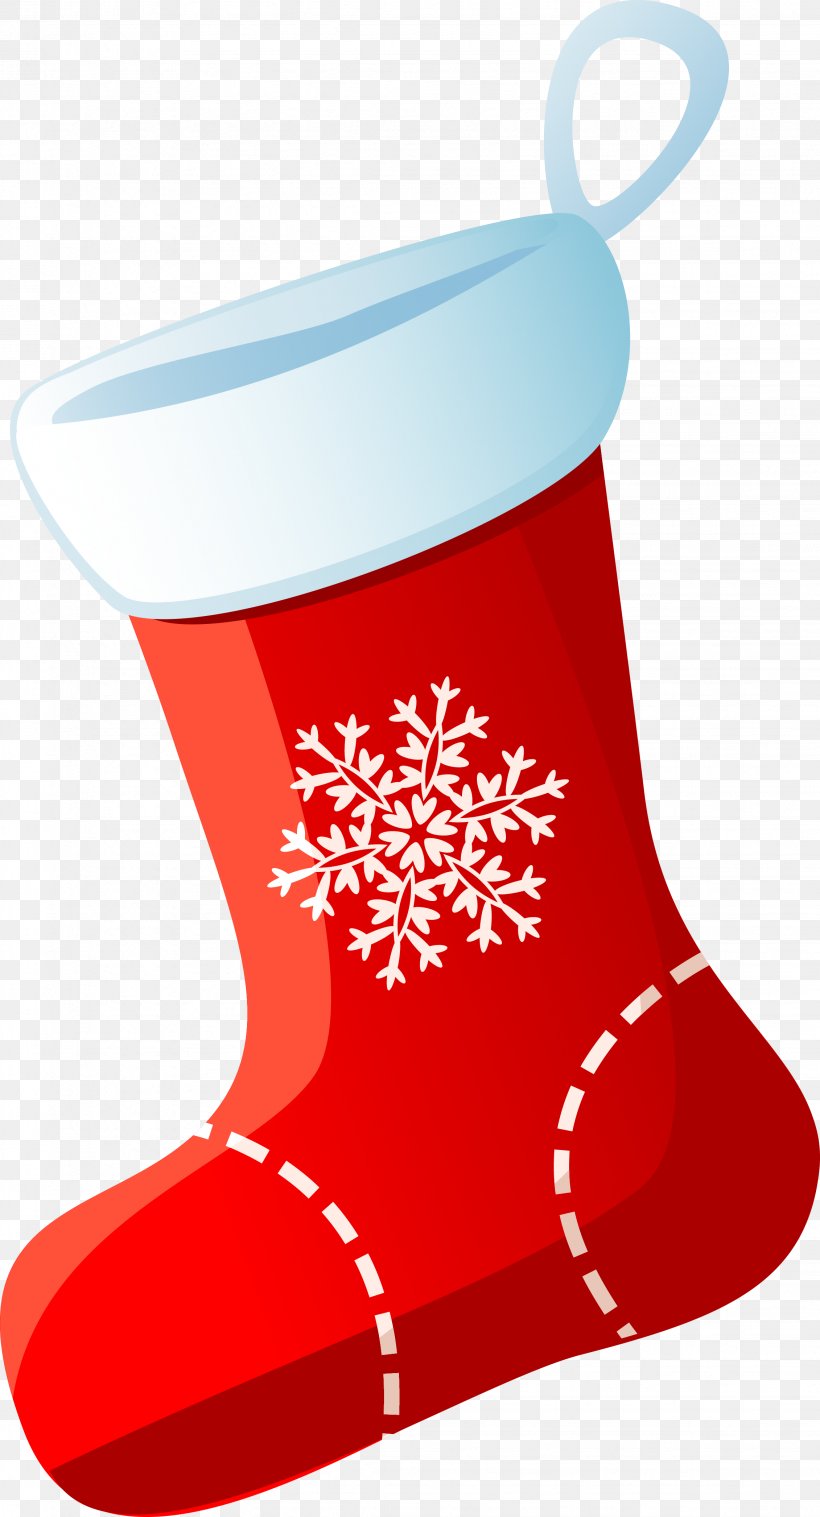 Christmas Stockings Sock Clip Art, PNG, 2261x4184px, Christmas Stockings, Christmas, Christmas Decoration, Christmas Ornament, Christmas Stocking Download Free